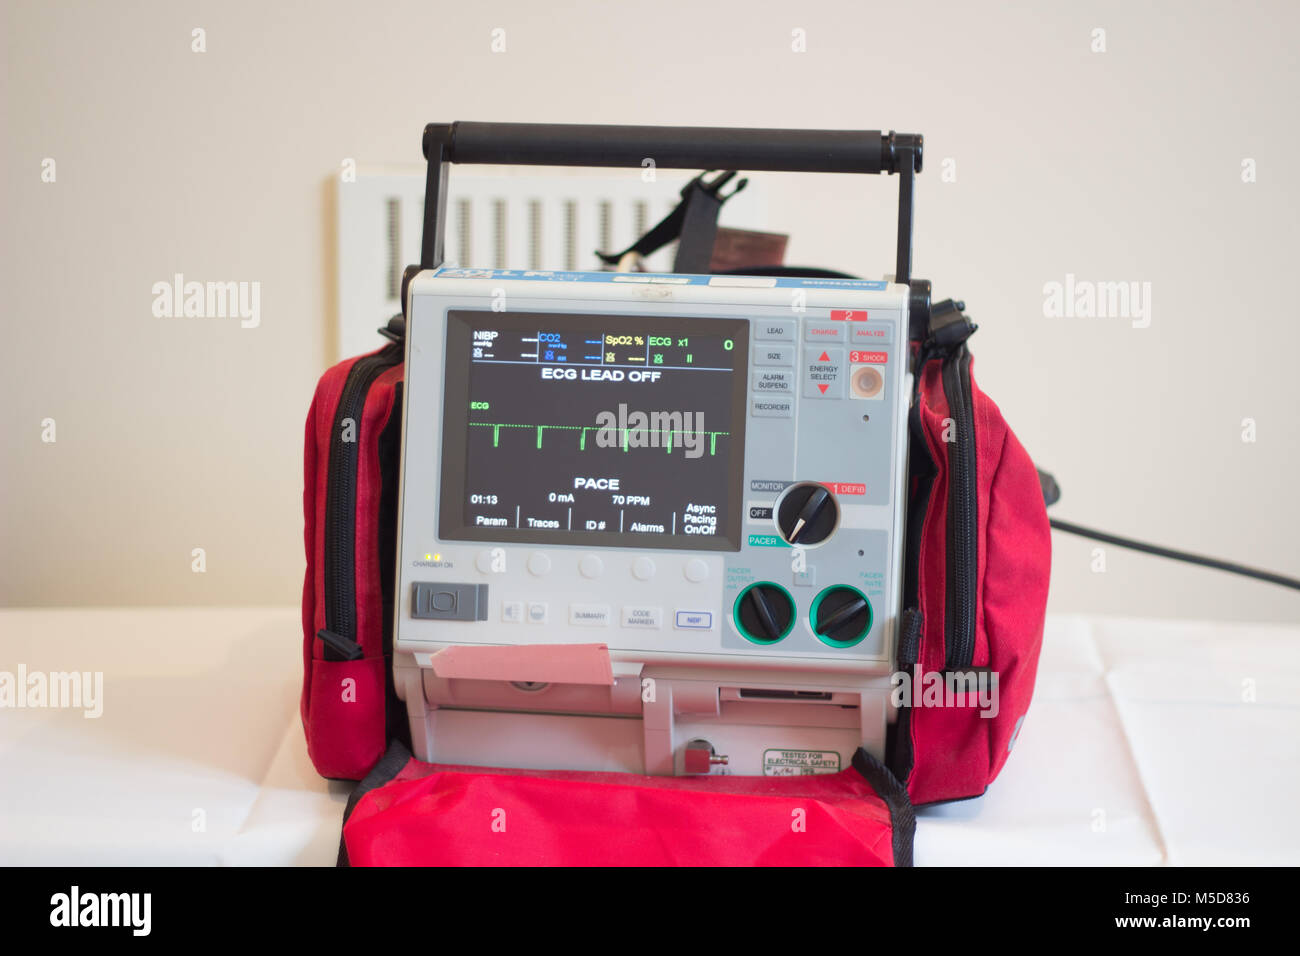 Zoll CCT Defibrillator equipment in red carrying case for cardiac arrest, ECG, AED Stock Photo